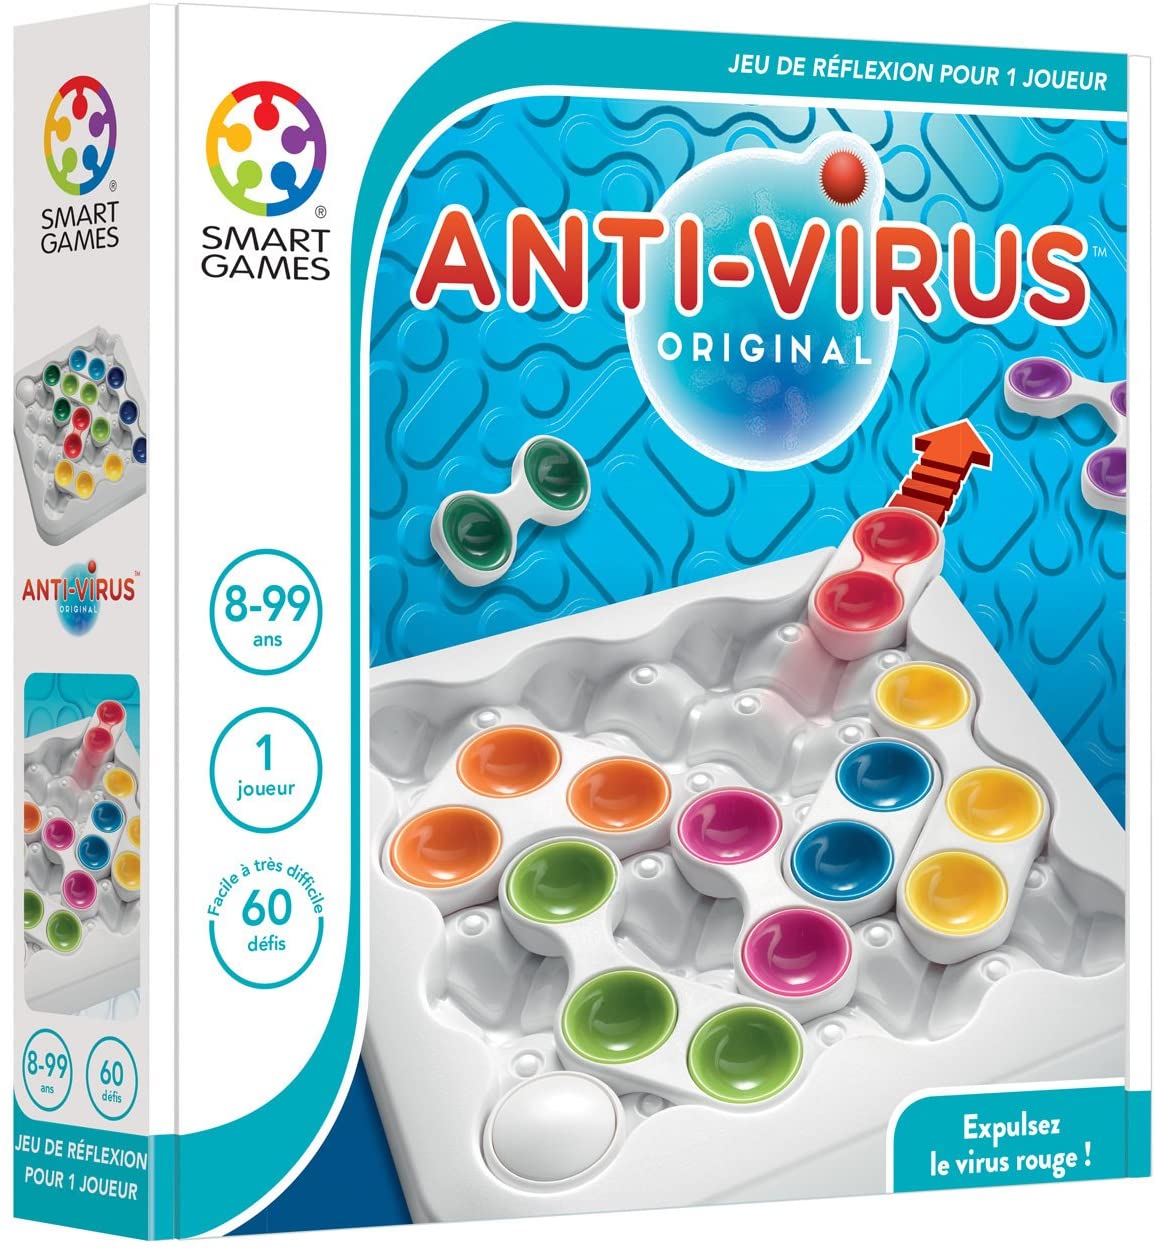 Smart Games – Sg 520 Fr – Game Of Reflection And Logic – Expulsez The Virus